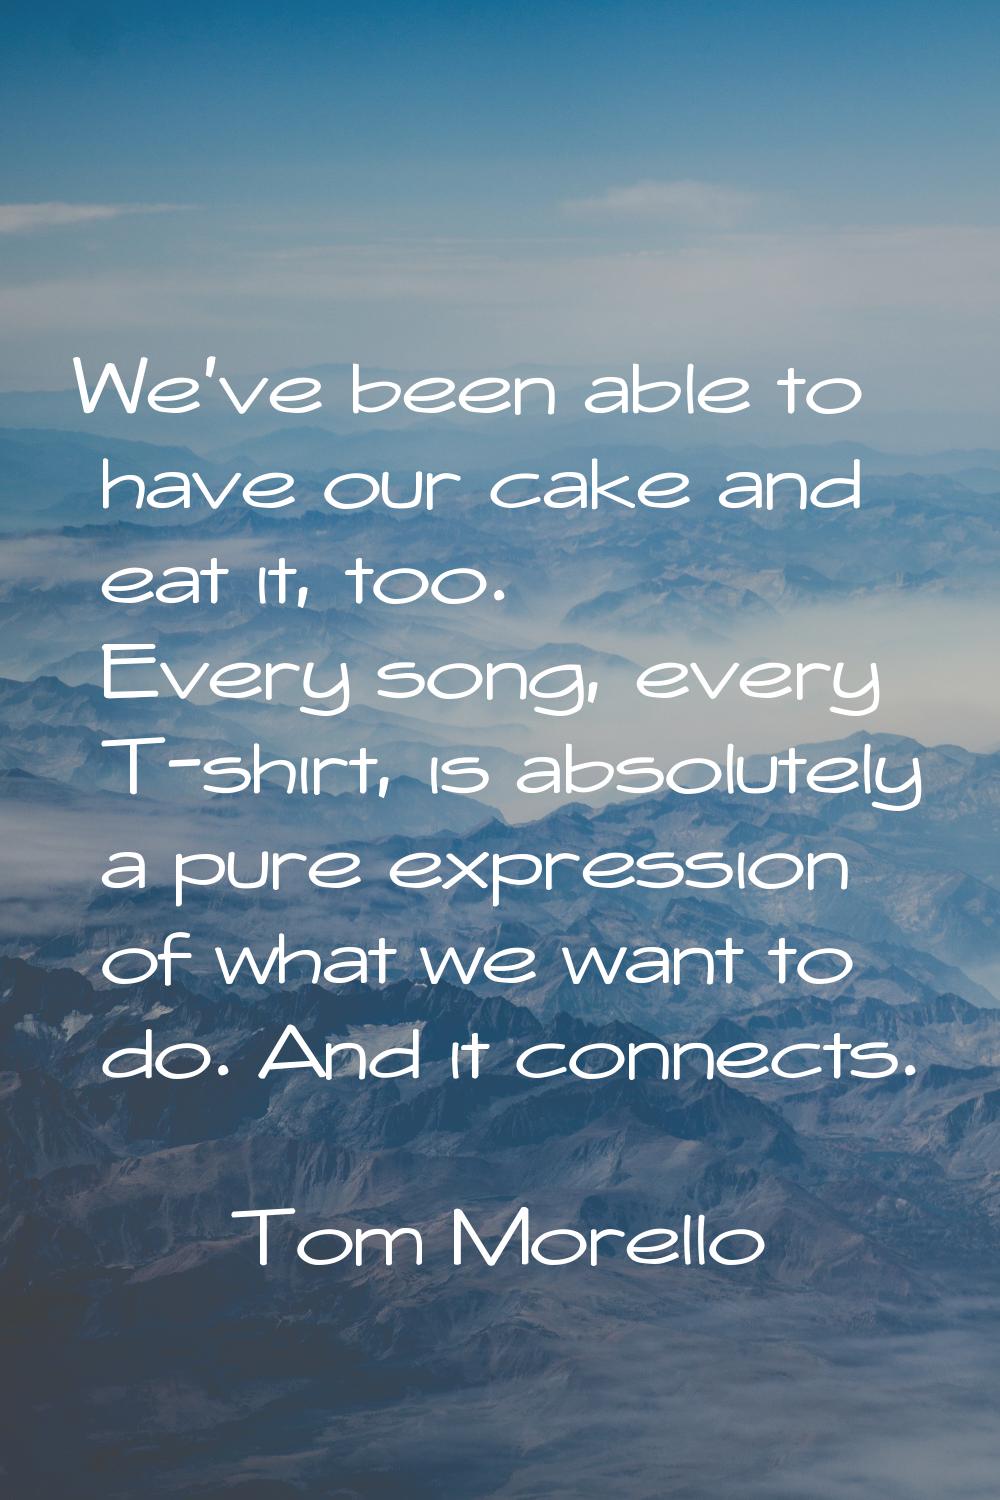 We've been able to have our cake and eat it, too. Every song, every T-shirt, is absolutely a pure e